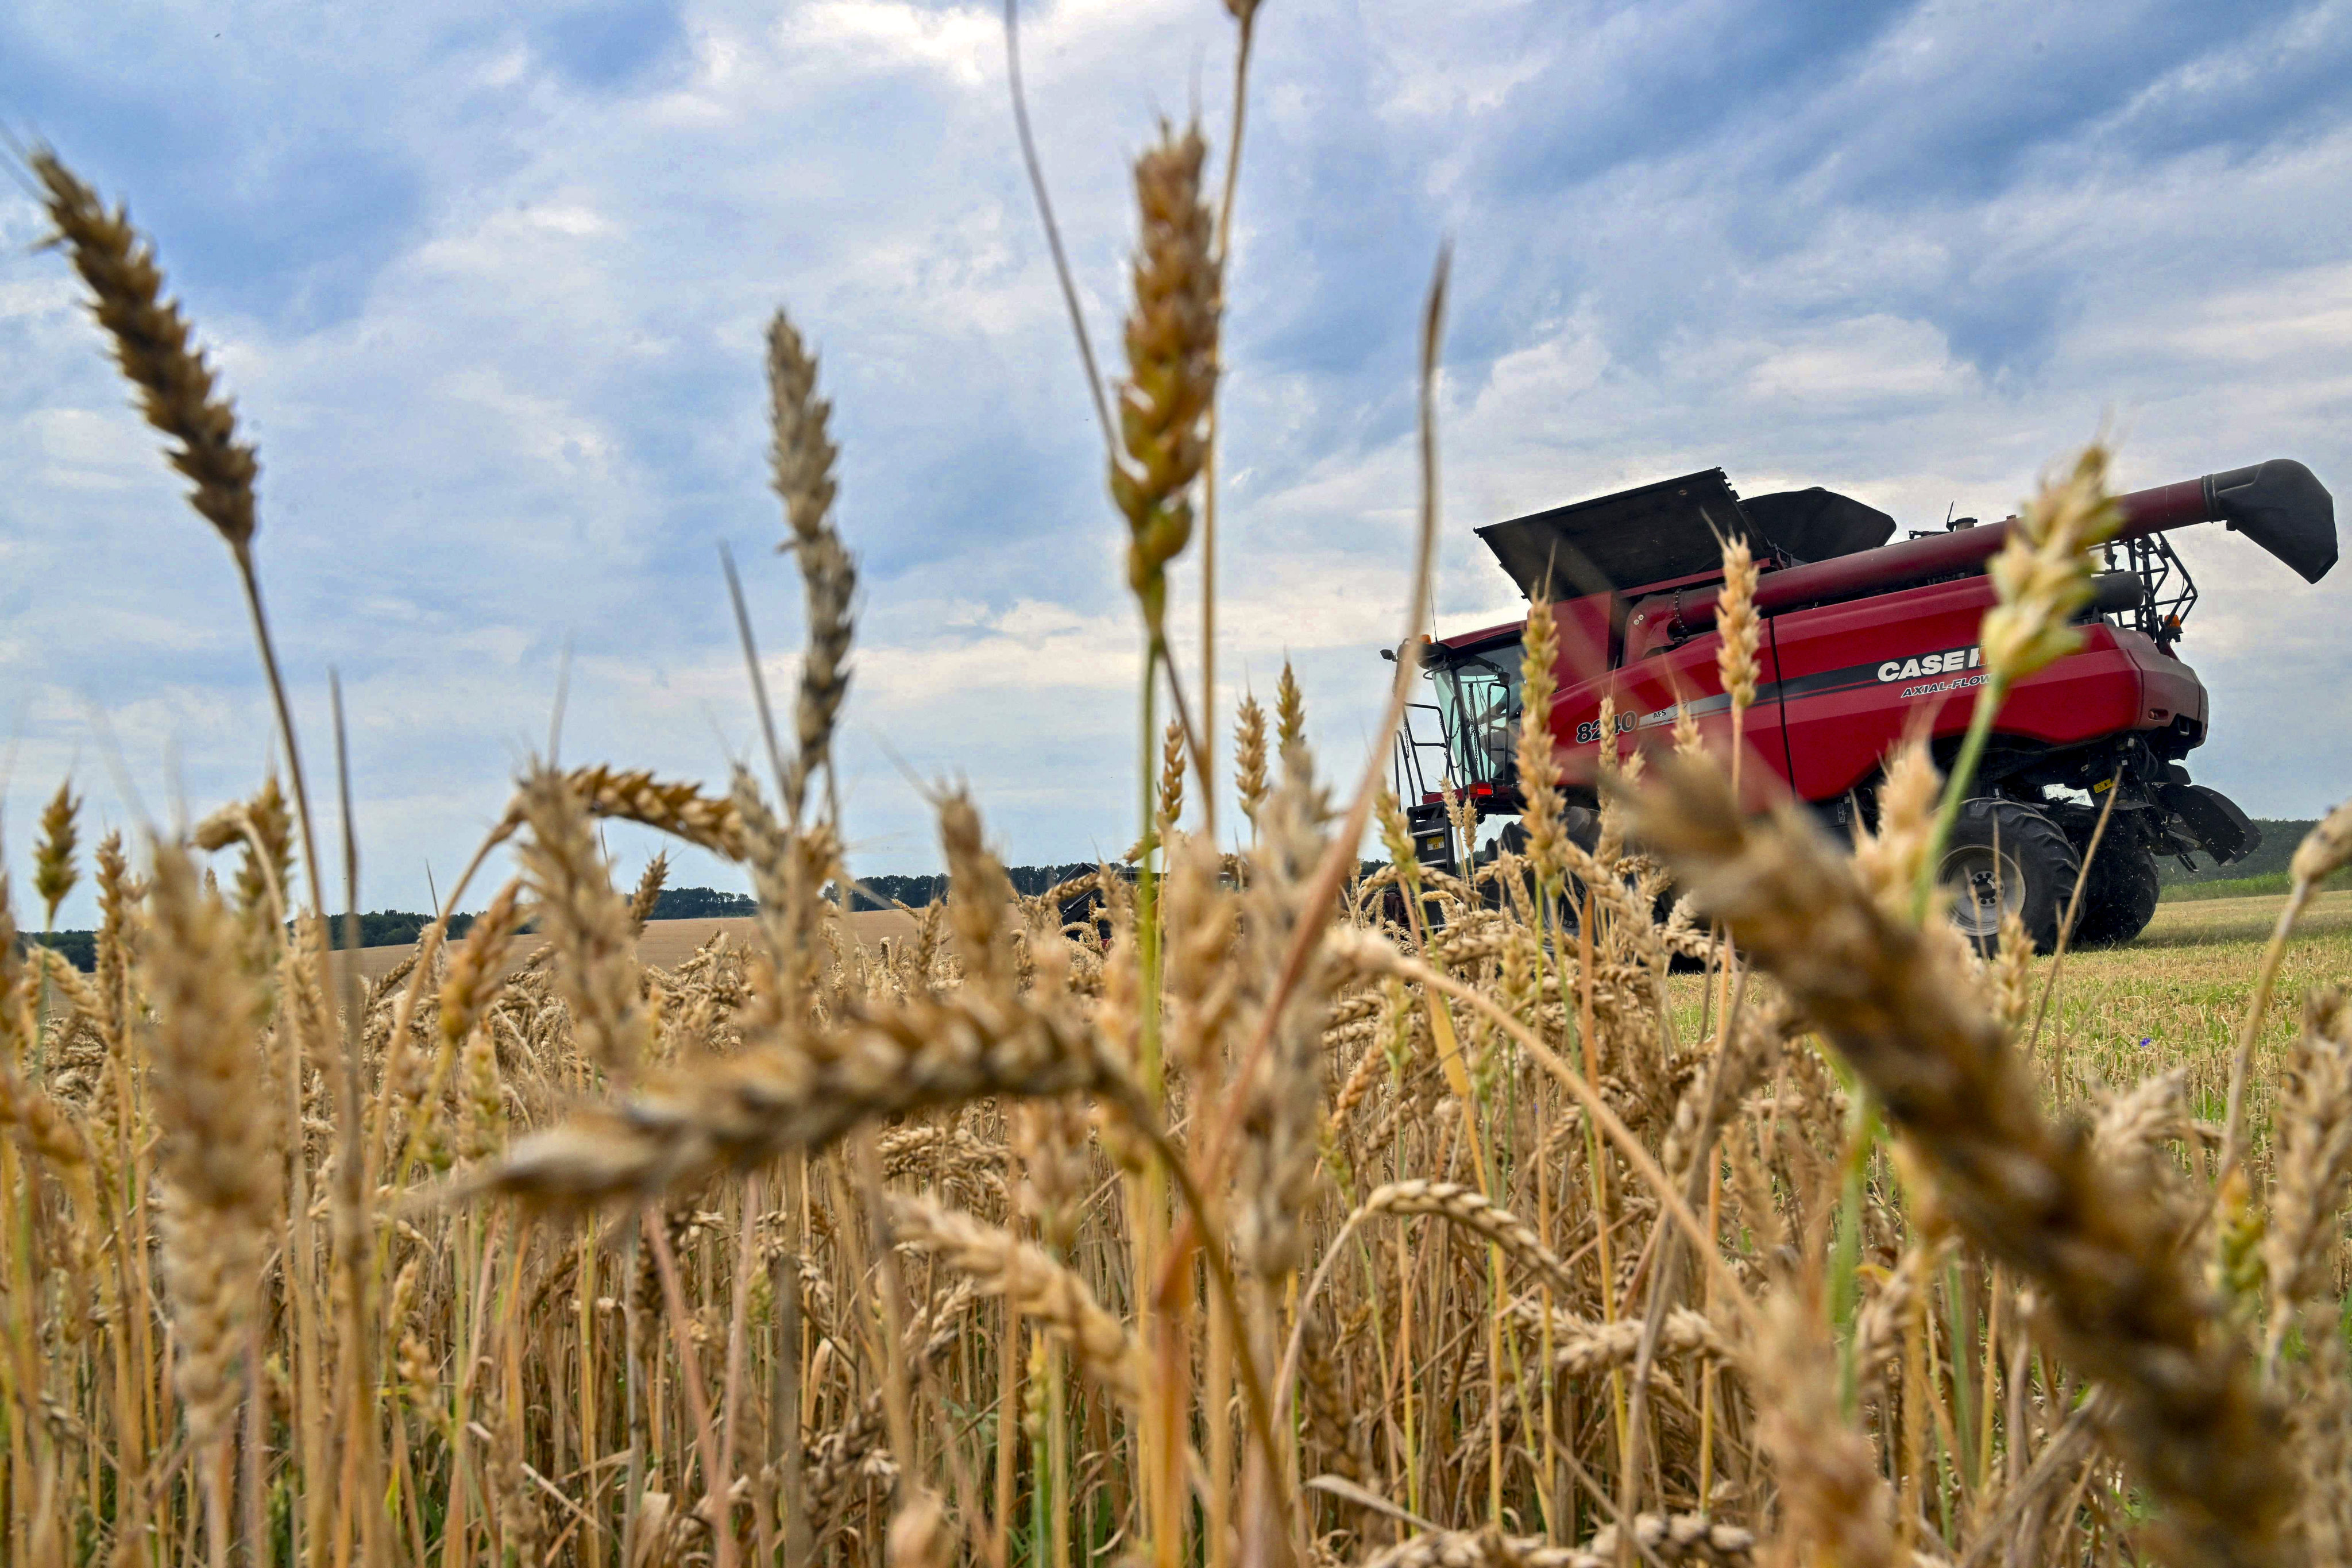 Wheat is harvested in a field near Kivshovata village, Kyiv region, on Tuesday. China’s commerce vice-minister Ling Ji has told Ukraine’s Taras Kachka that Beijing is ready to work with Kyiv to “actively” develop bilateral economic and trade cooperation.  Photo: AFP